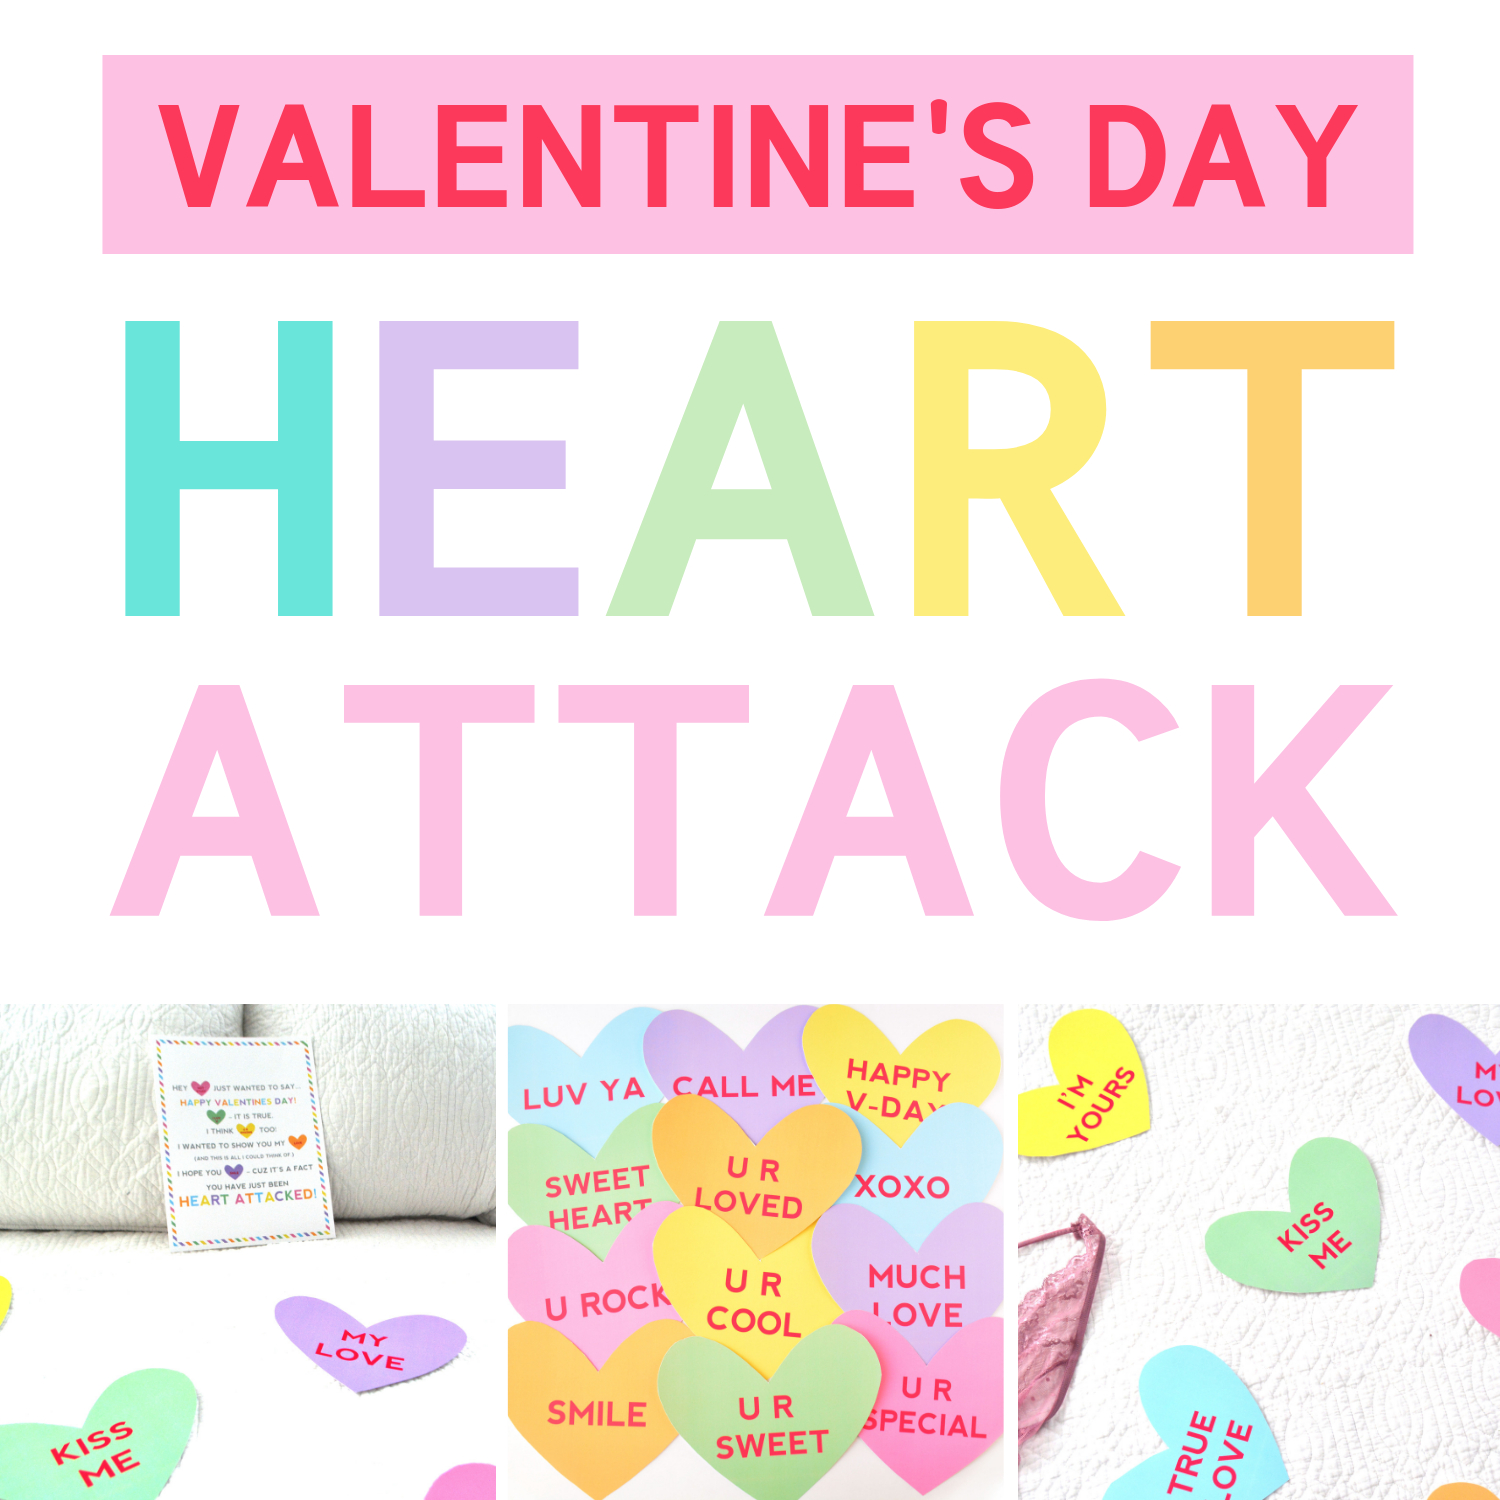 Valentine's Day Heart Attack Lawn Signs  From The Dating Divas throughout Valentine Heart Attack Idea With Free Printable Heart Template